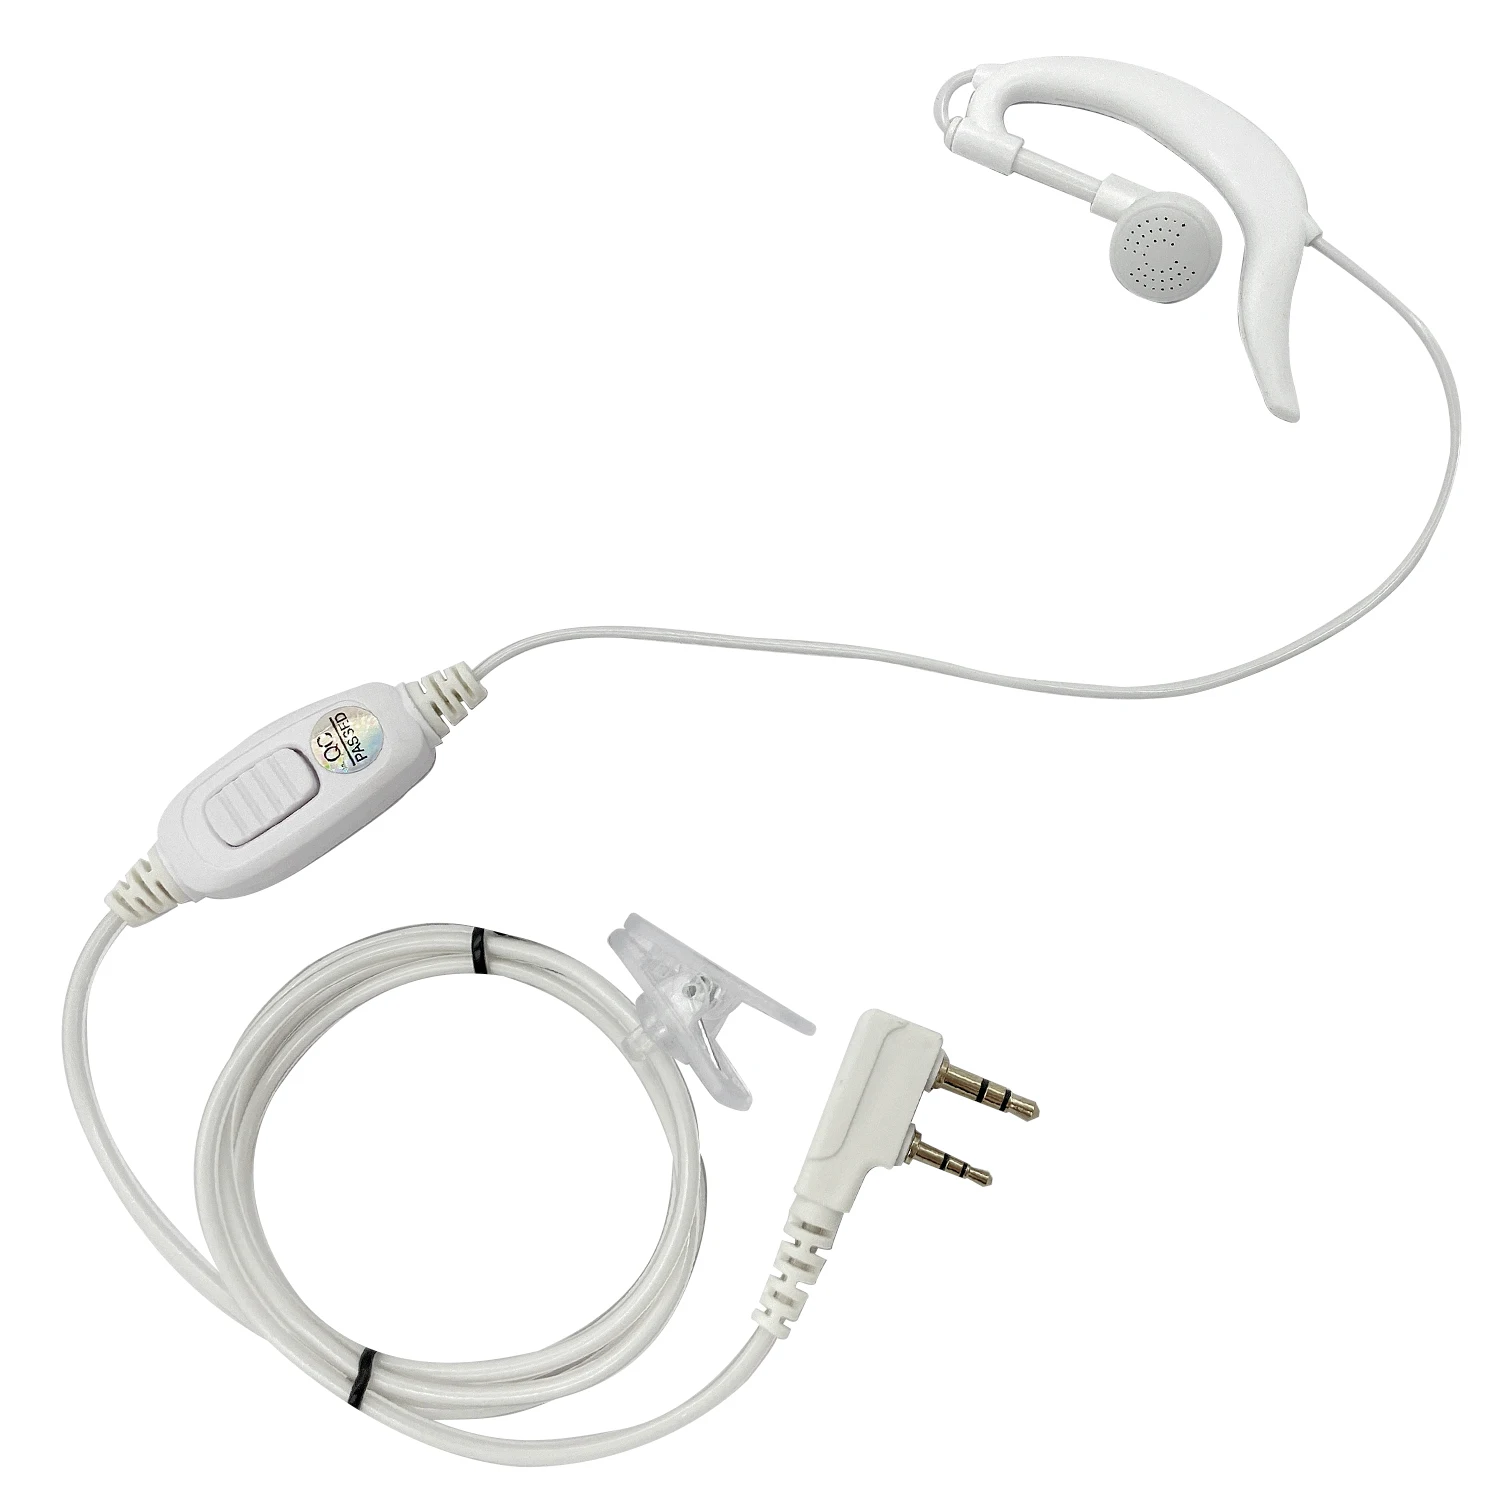 White G type earphone intercom earphone Oval PTT is suitable for use baofeng BF-T3, BF-888S, BF-F8HP two way radios